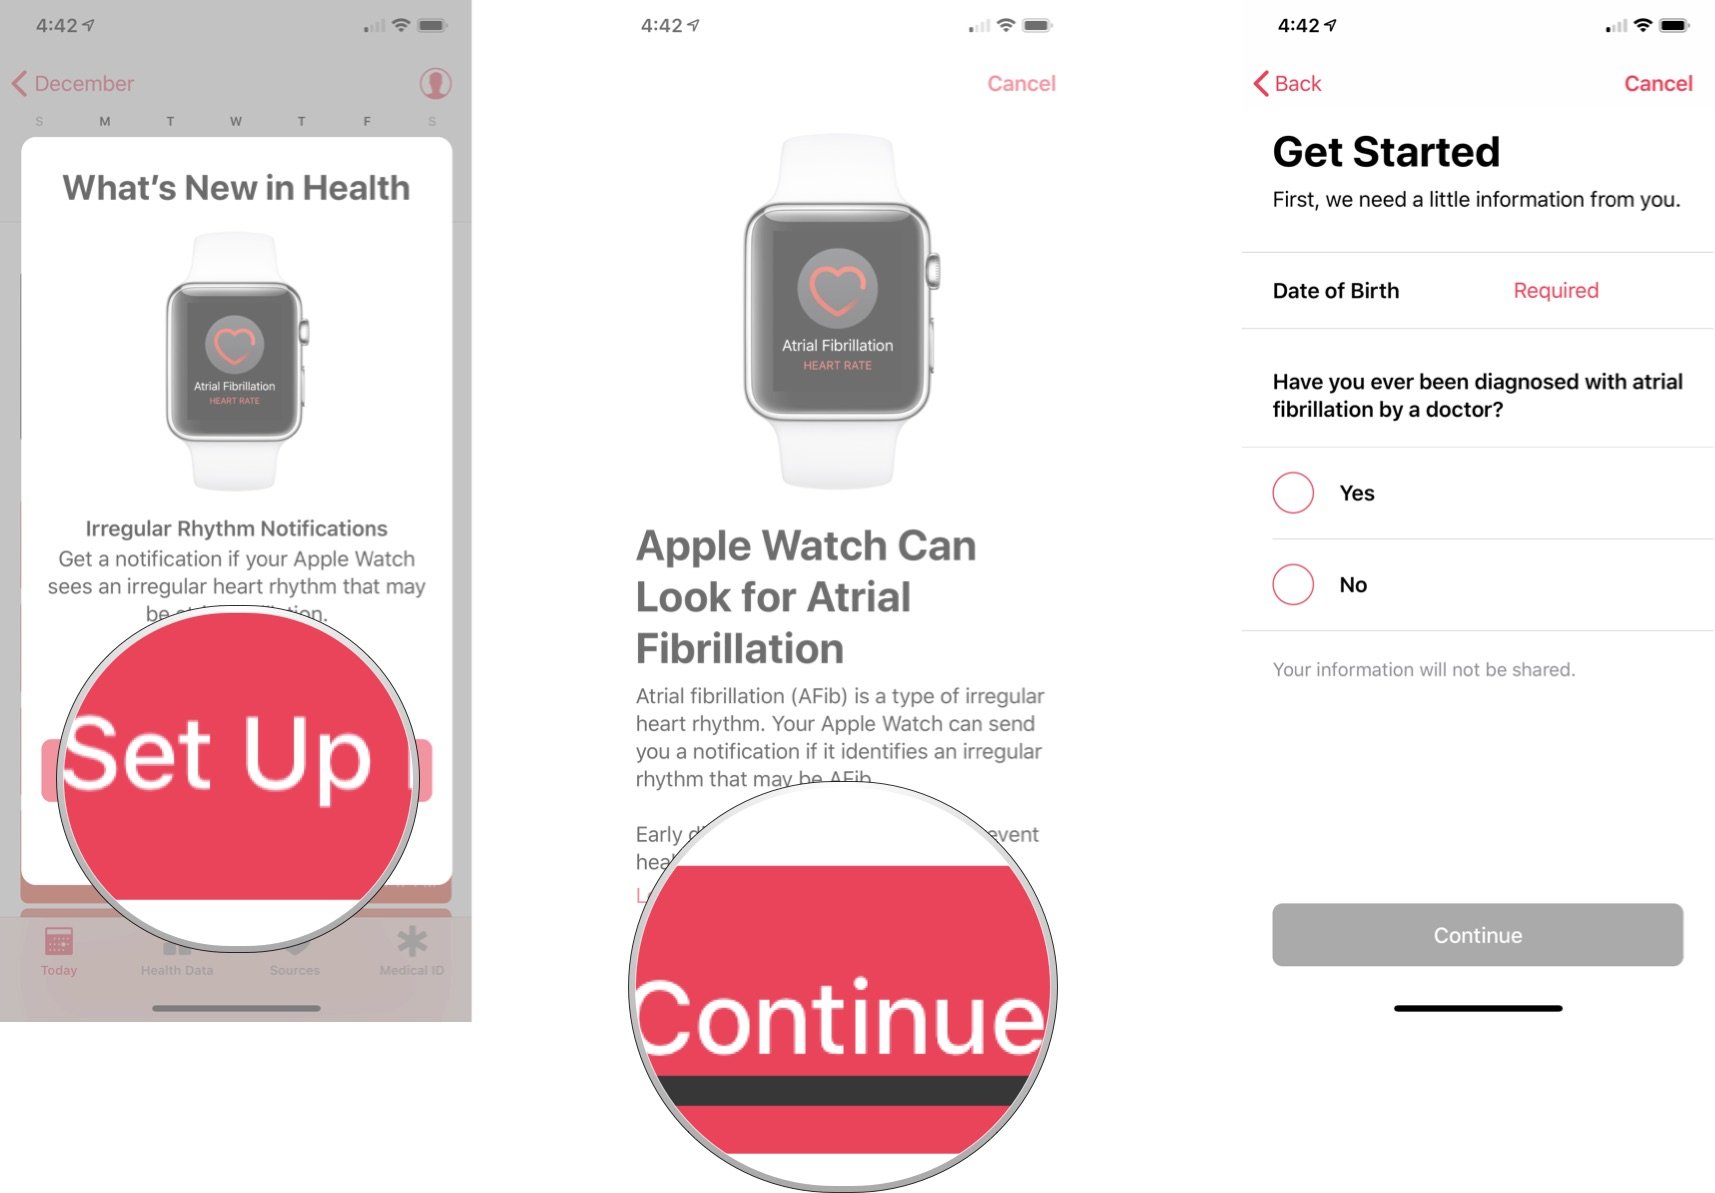 To set up and use the irregular rhythm notification on Apple Watch, tap Set Up Notifications, then selection Continue. Enter your birthday, then tap Continue."